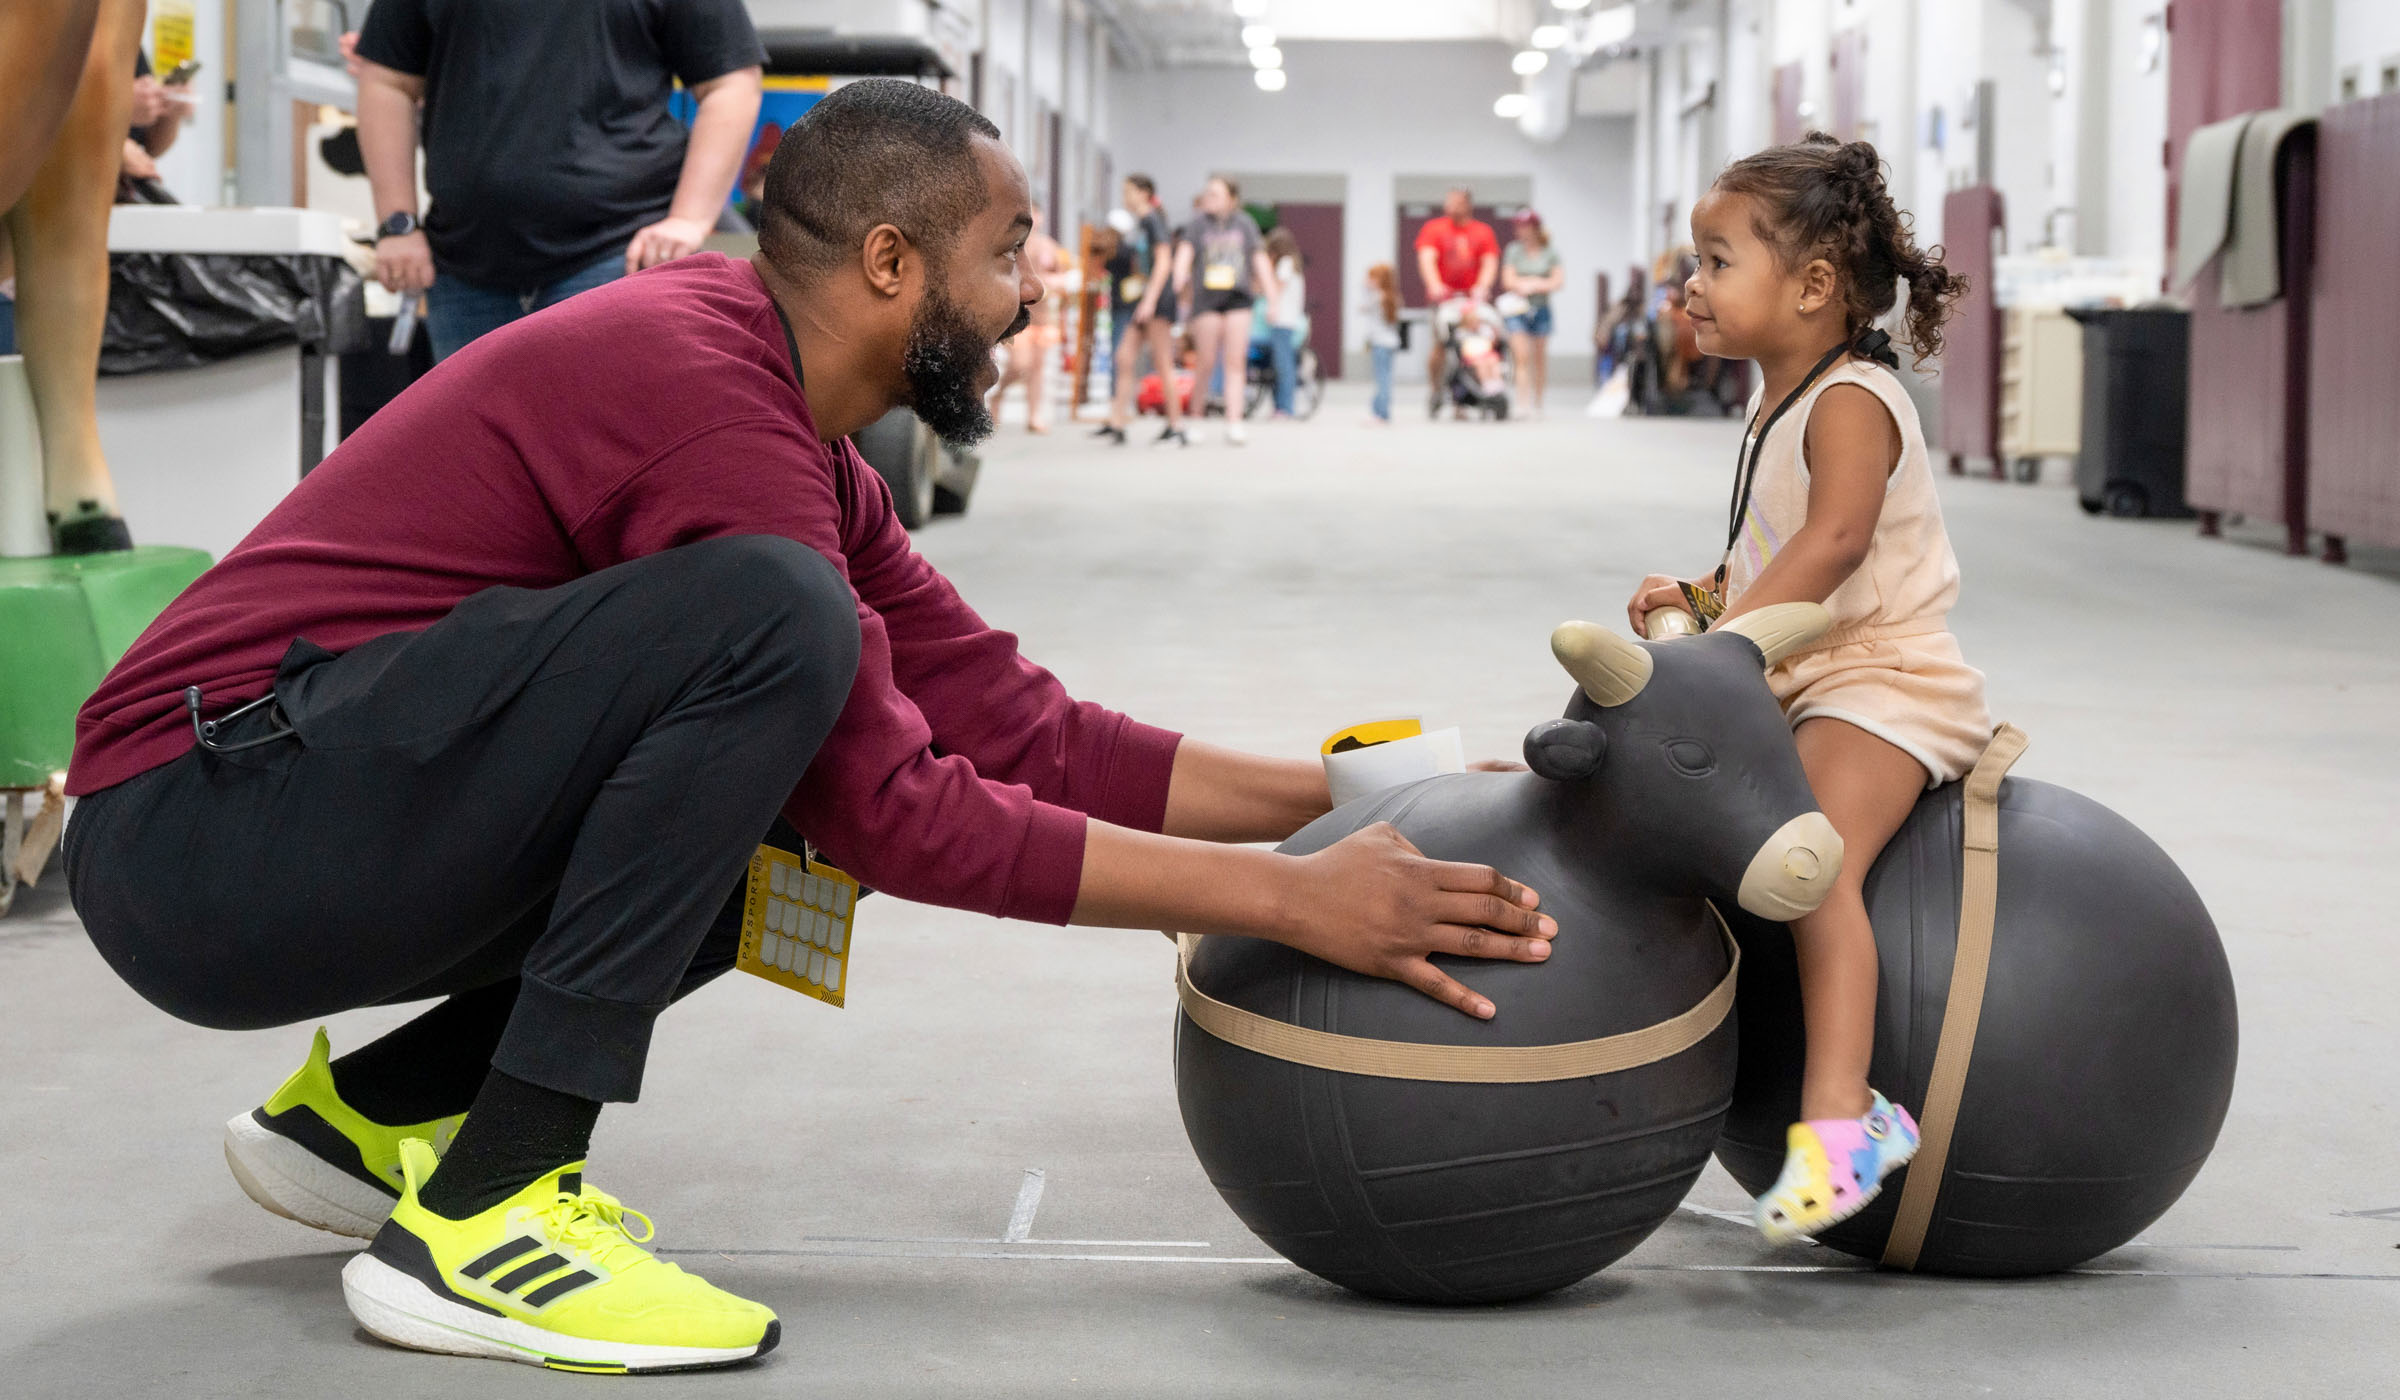 CVM student Matthew Tennin (af left) crouches on the ground to play with his daugher, with his daughter on a cow-shaped bouncy ball inside the Wise Center.